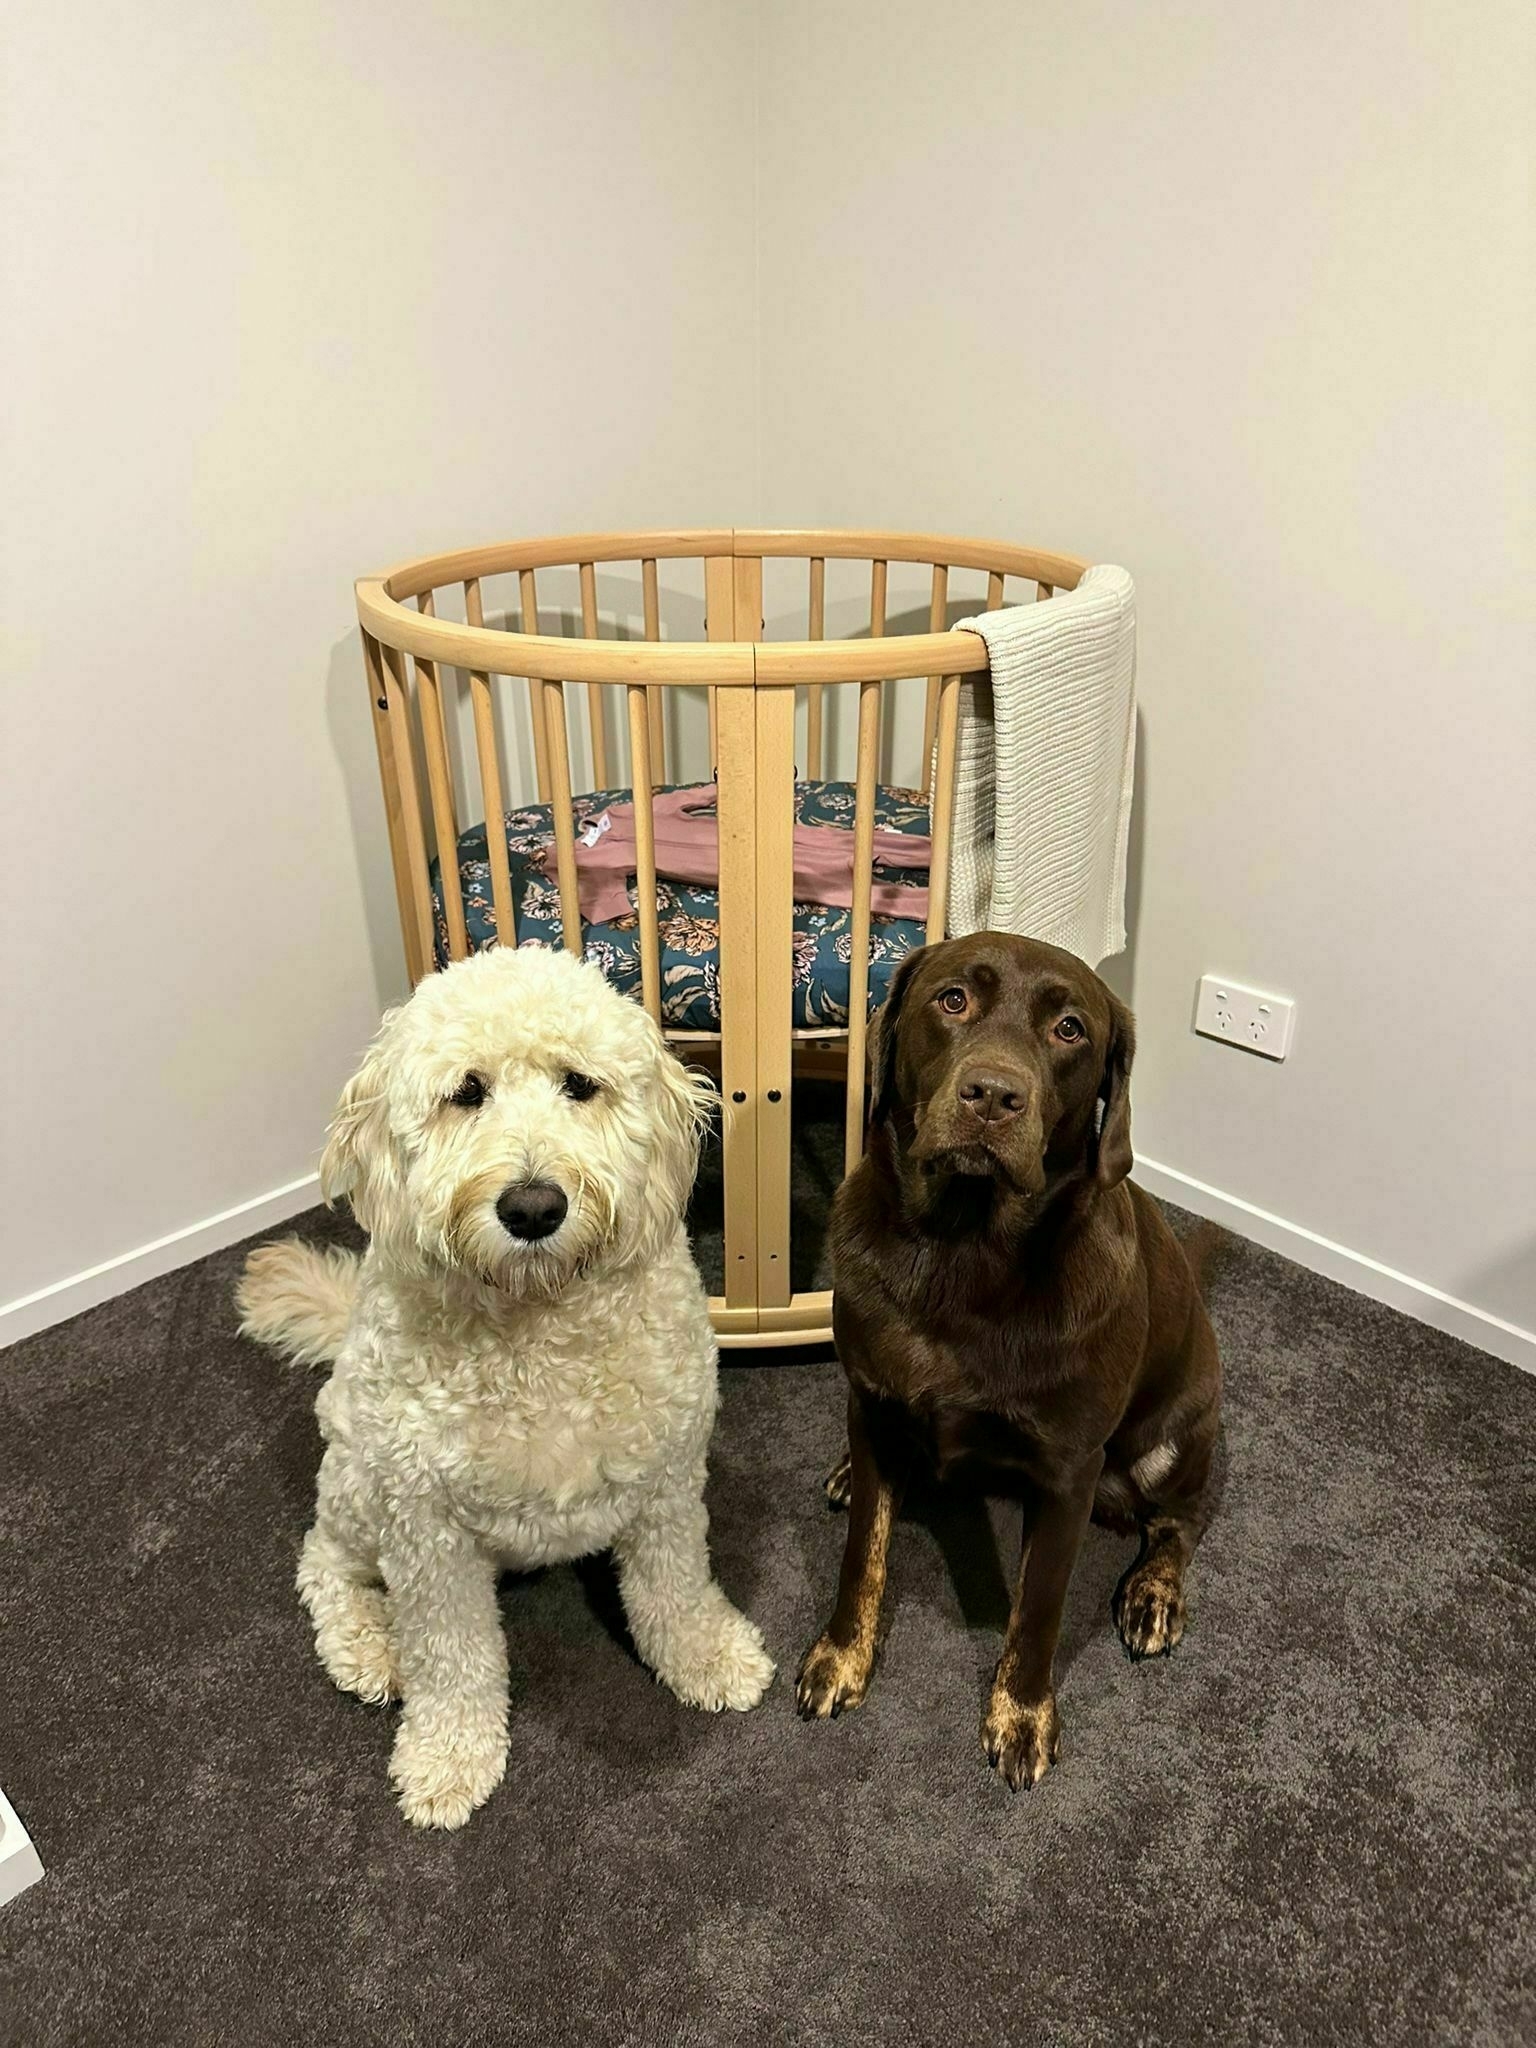 Chocolate lab & golden doodle standing in front of the baby’s cot